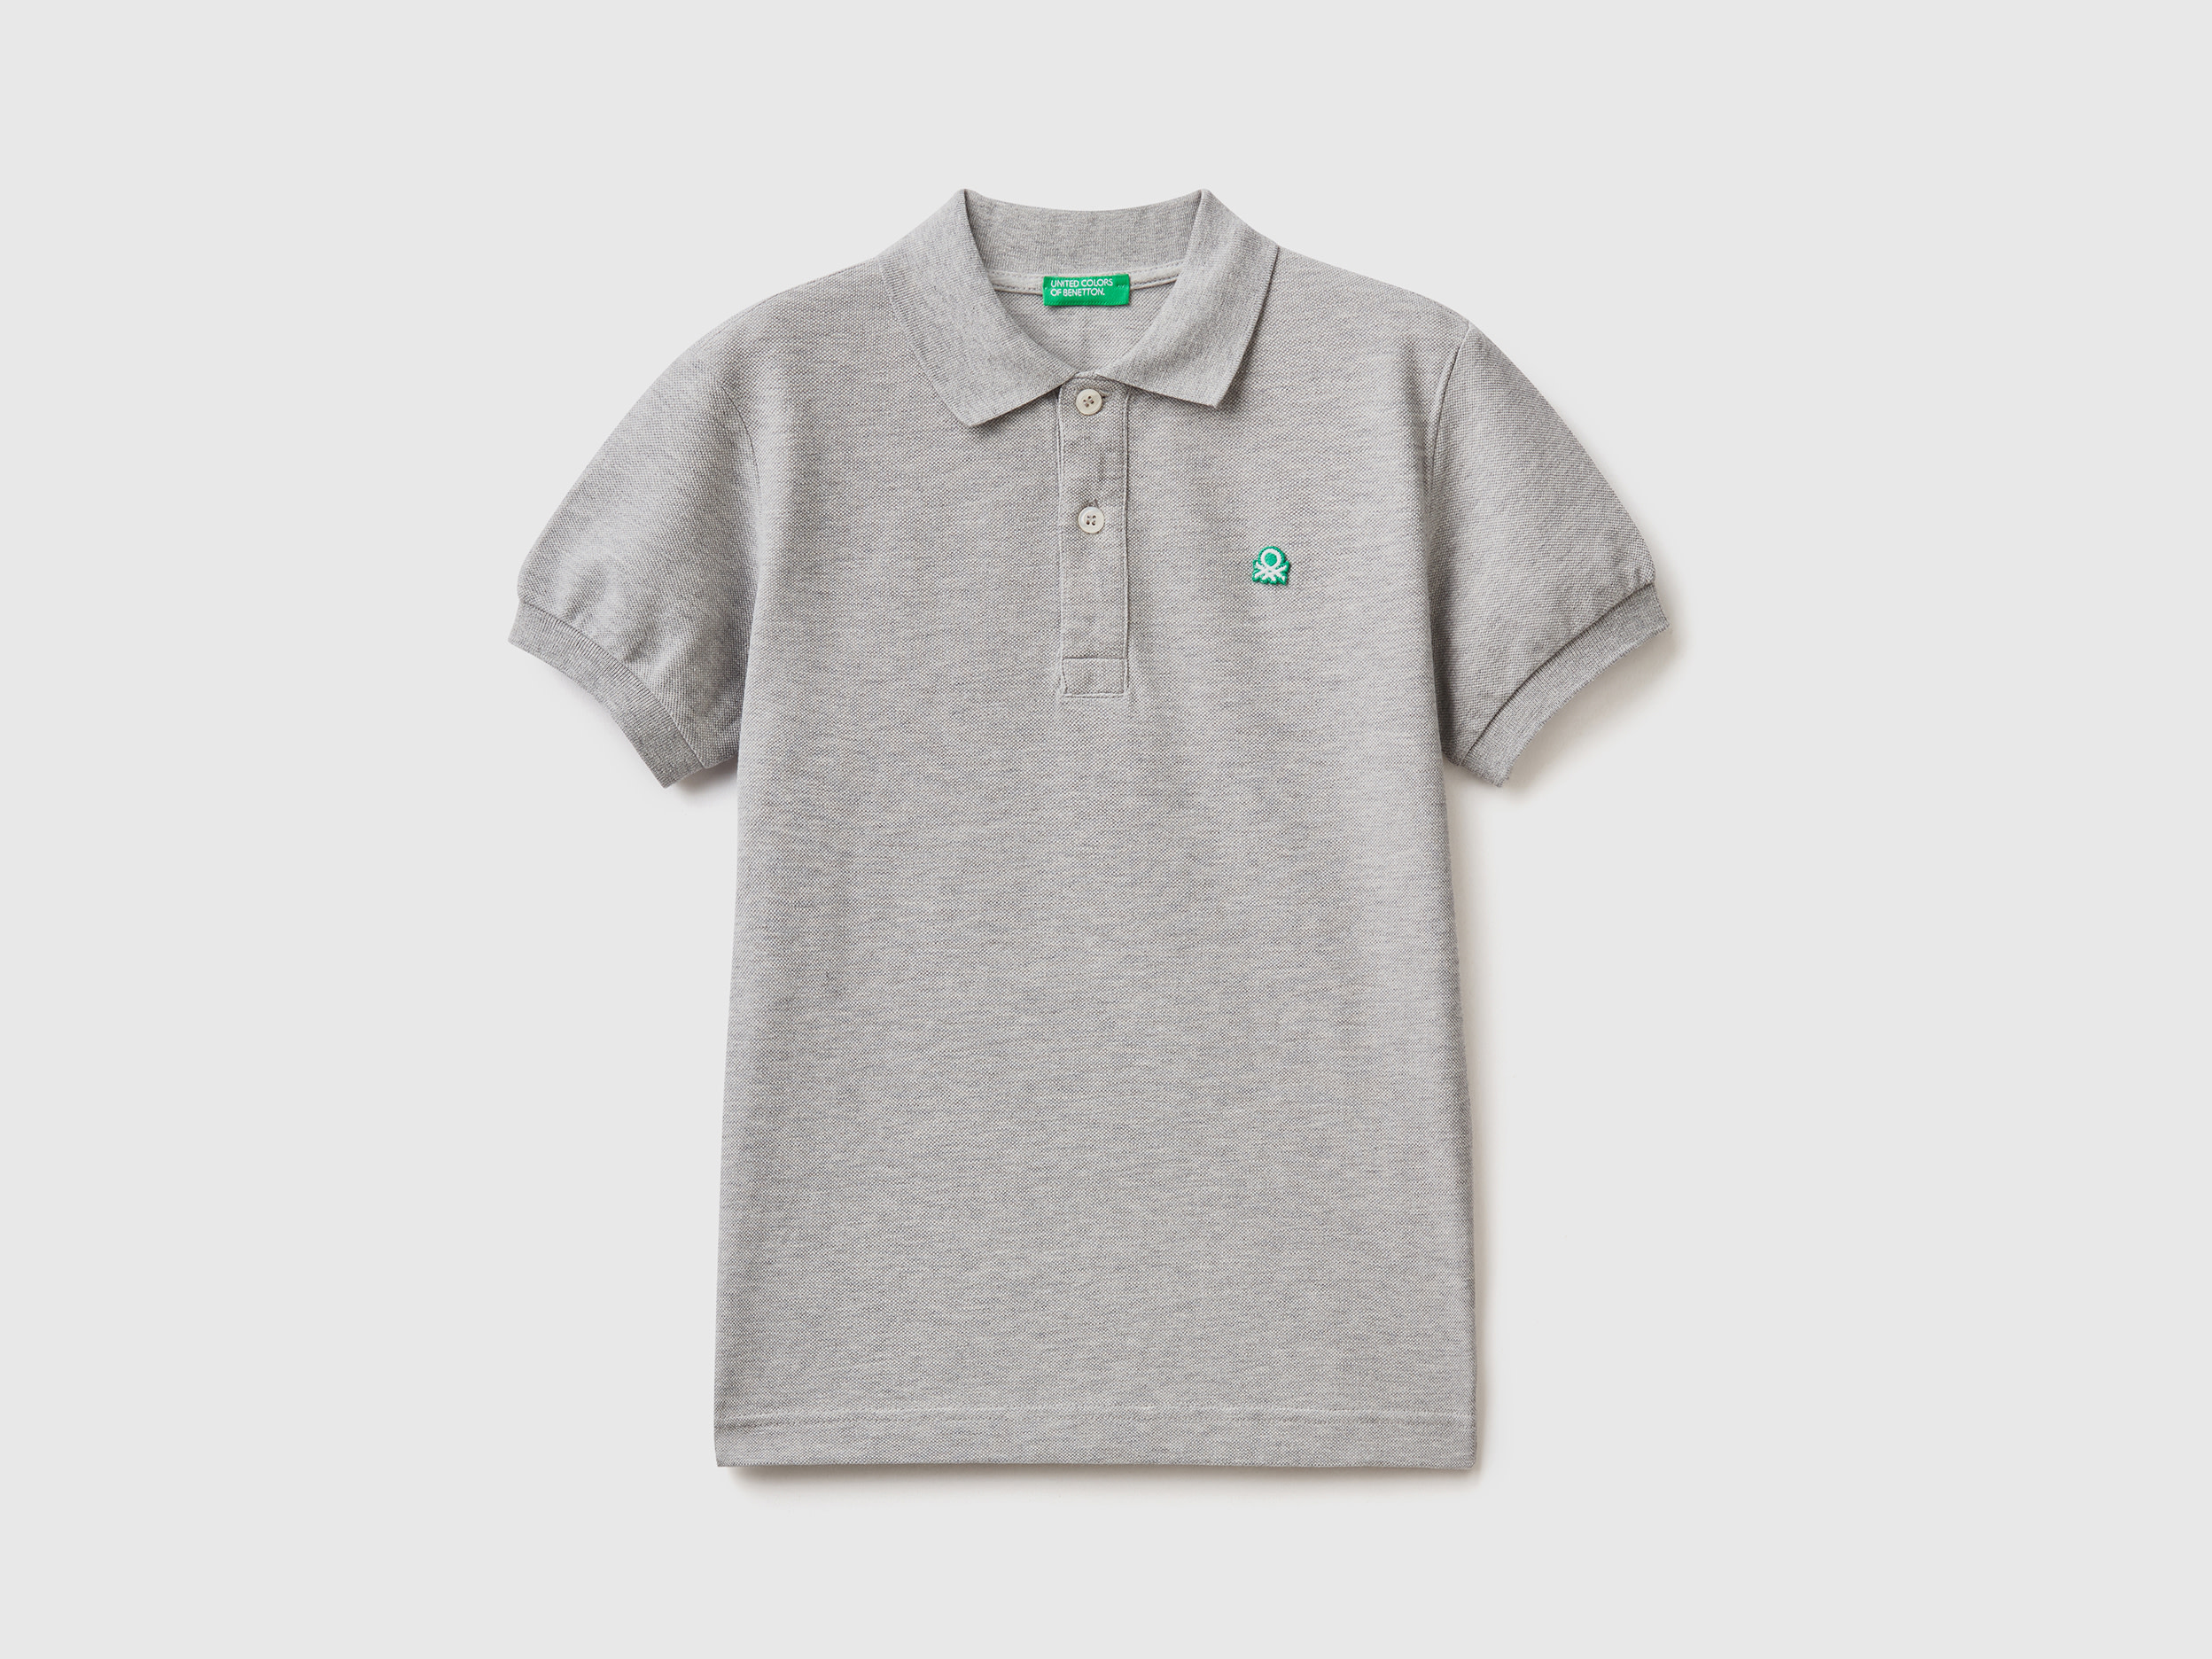 Image of Benetton, Slim Fit Polo In 100% Organic Cotton, size M, Light Gray, Kids